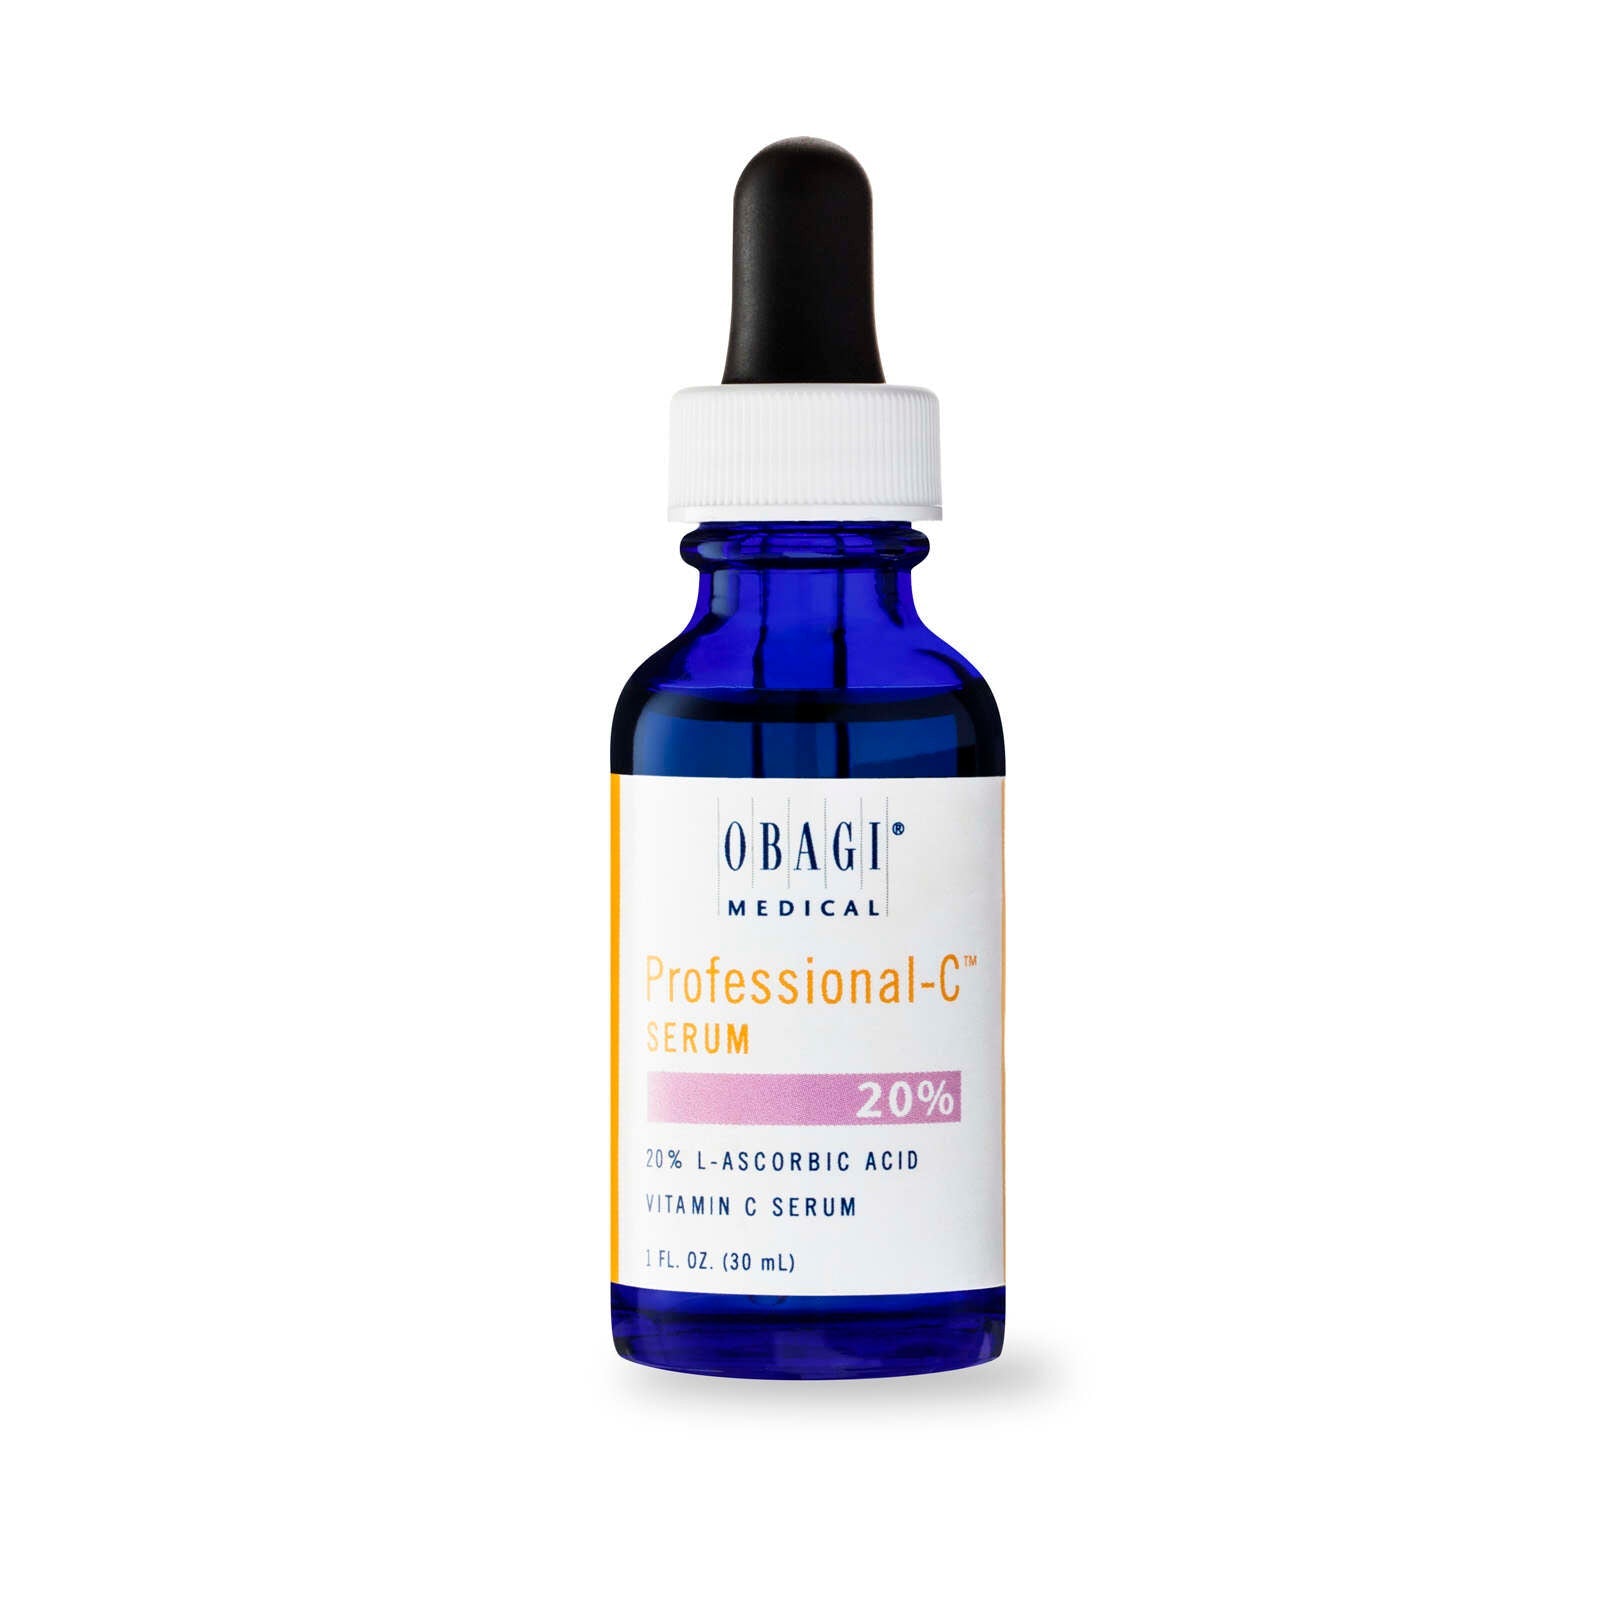 Buy Online Best OBAGI - Professional-C Serum 20% | Buy innovative clinical skincare products - TOPBODY